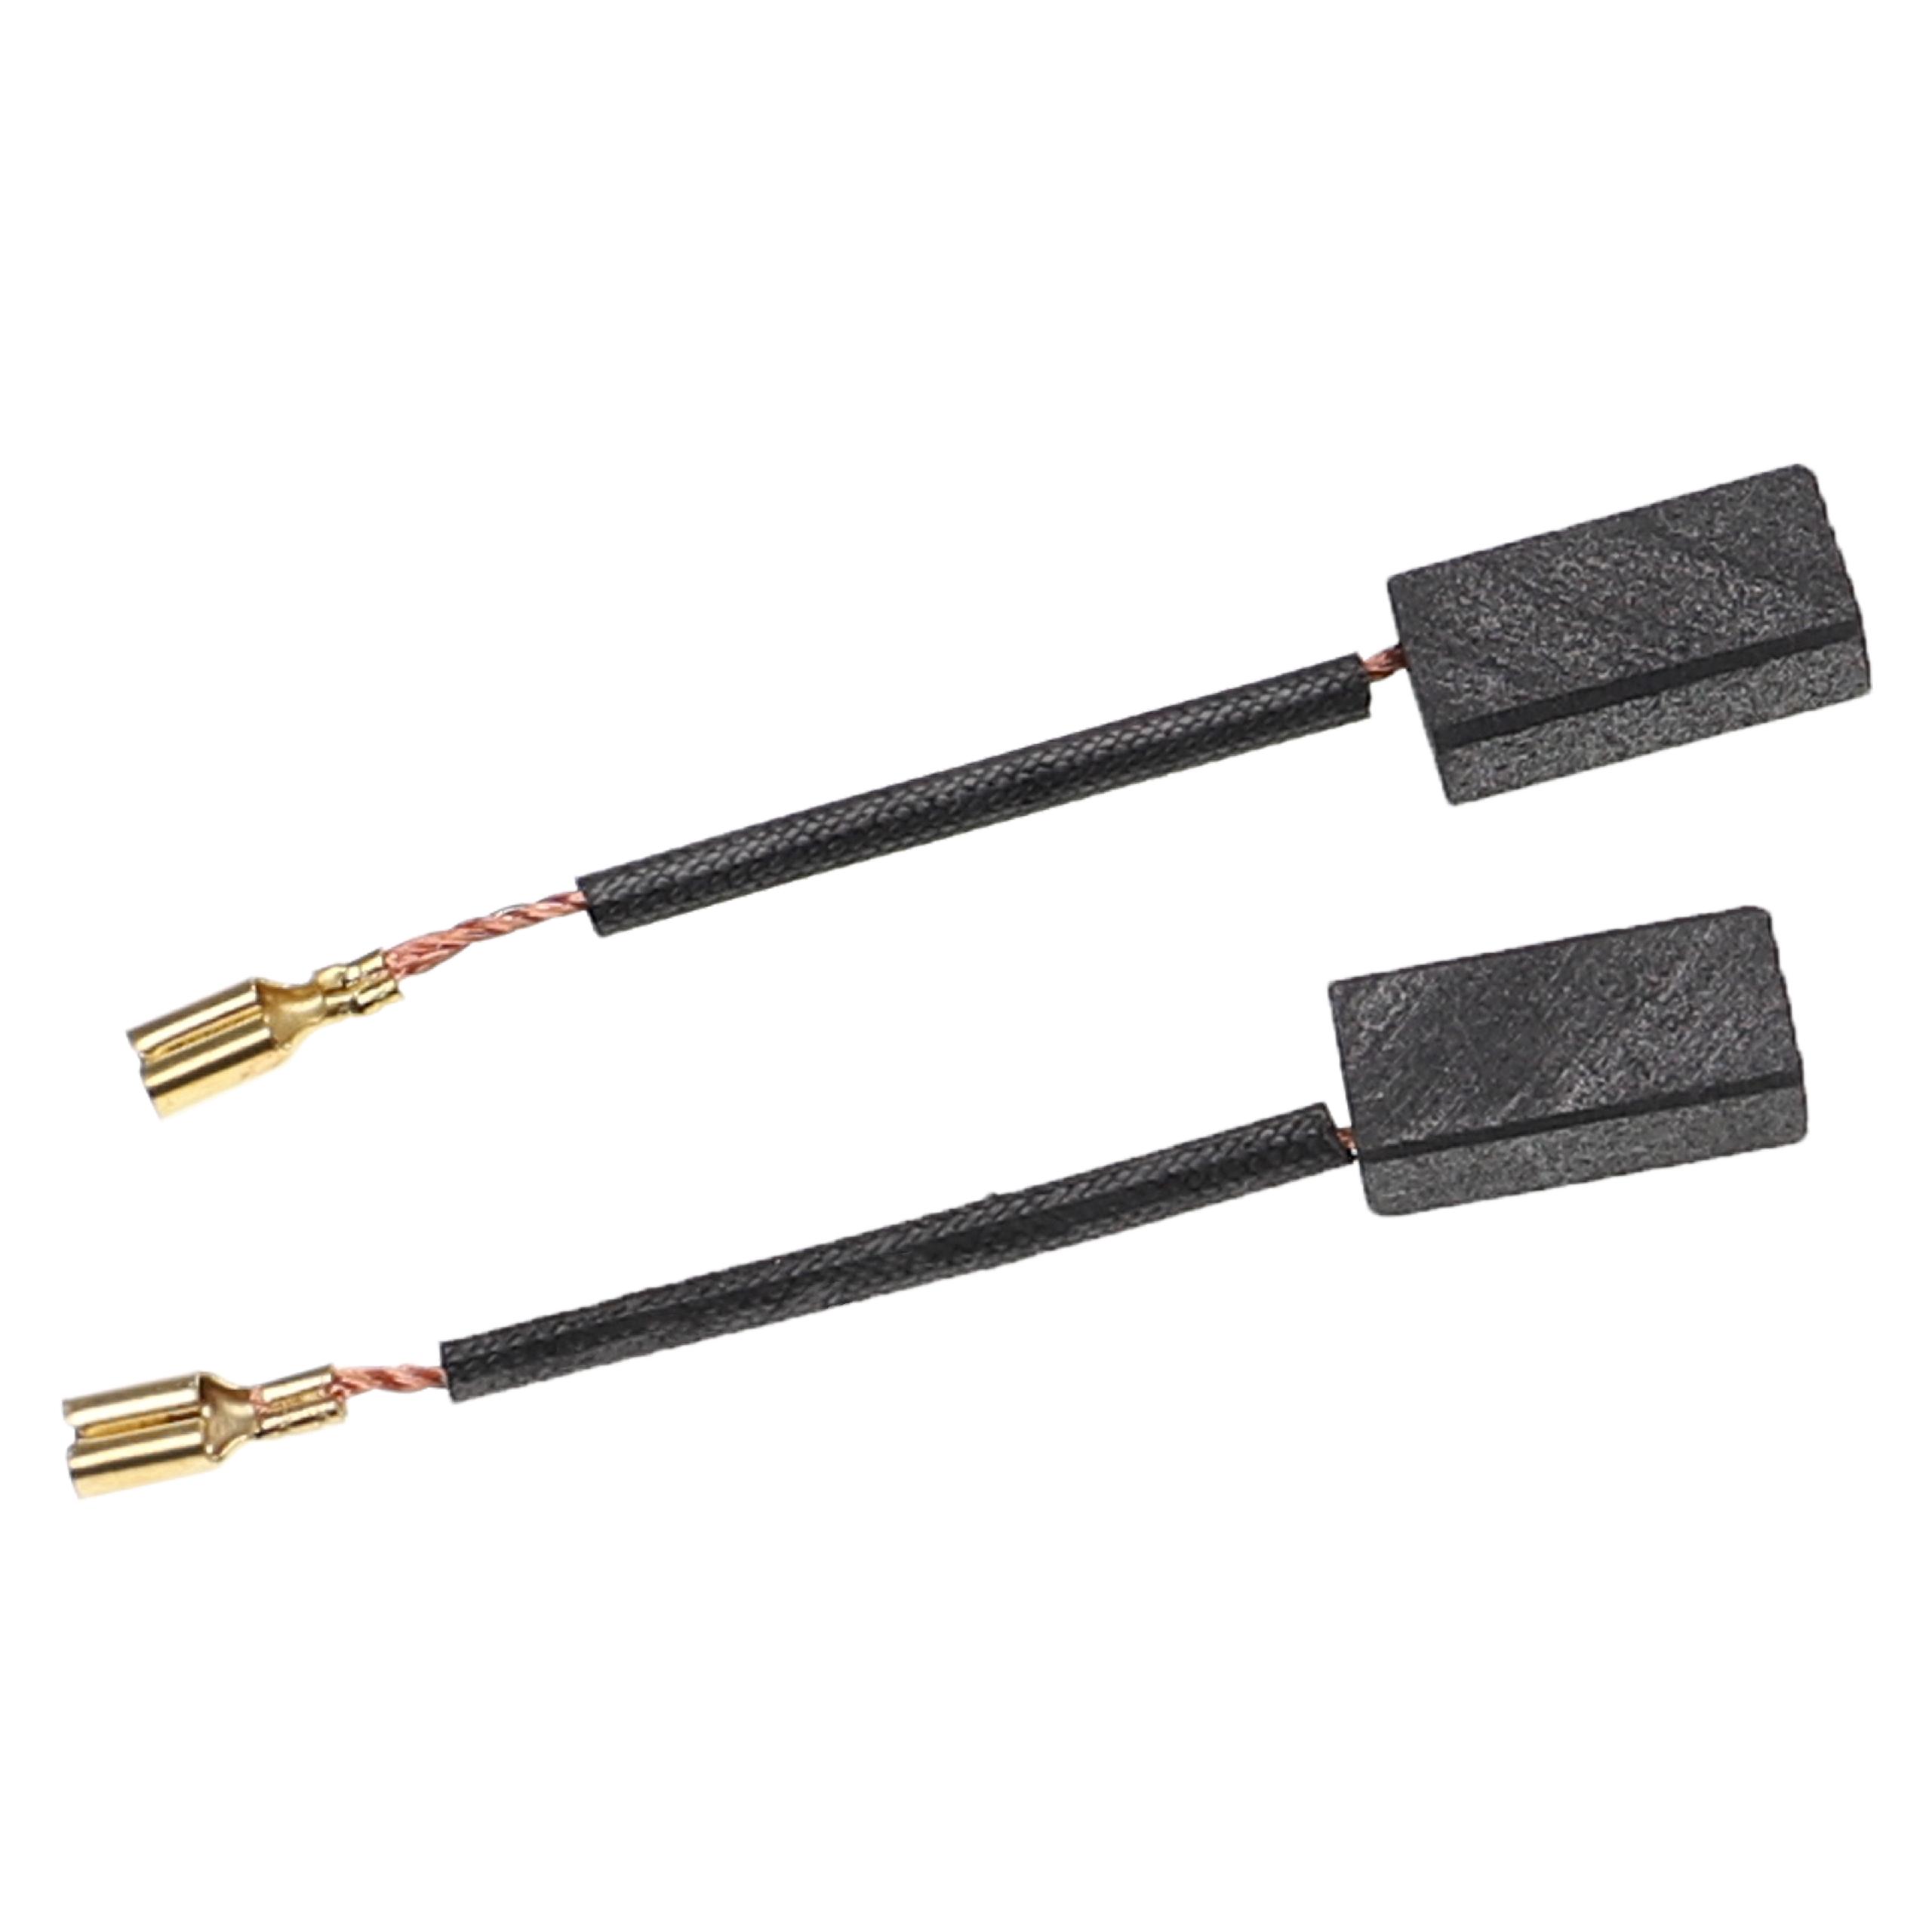 2x Carbon Brush as Replacement for Fein FMM250 Electric Power Tools, 5 x 8 x 16mm